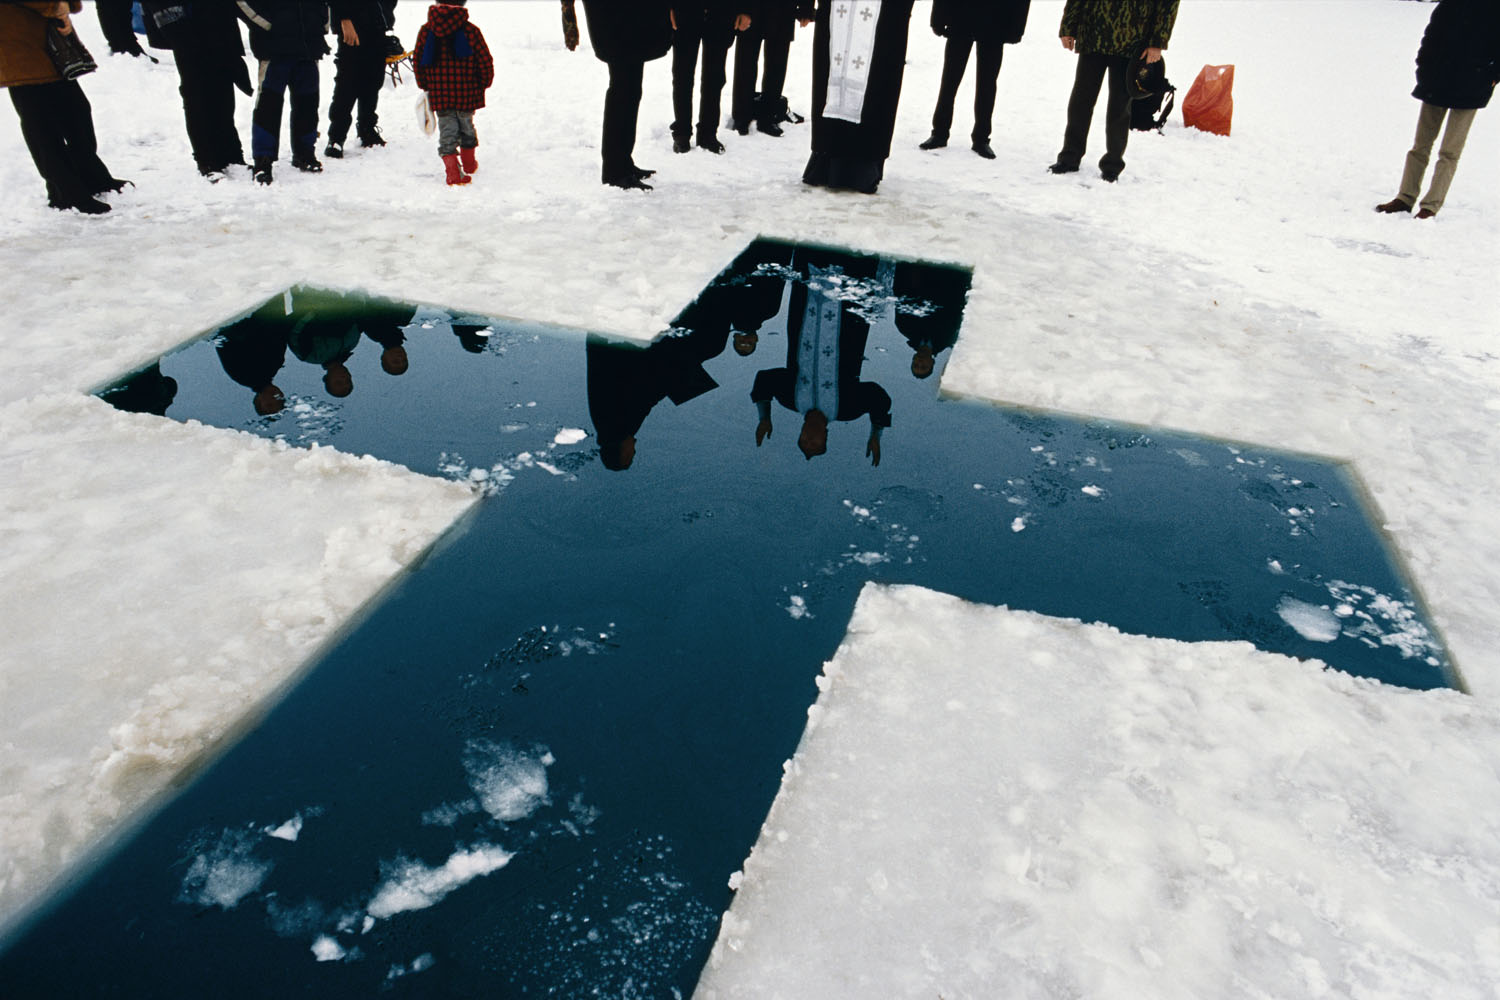 MOLDOVA. Transdniester. 2004. The population of Transdniester is mainly ethnic Russians, and the main religion is Russian Orthodox Christianity. Here a priest gives his blessings before a christening in the icy waters of January.